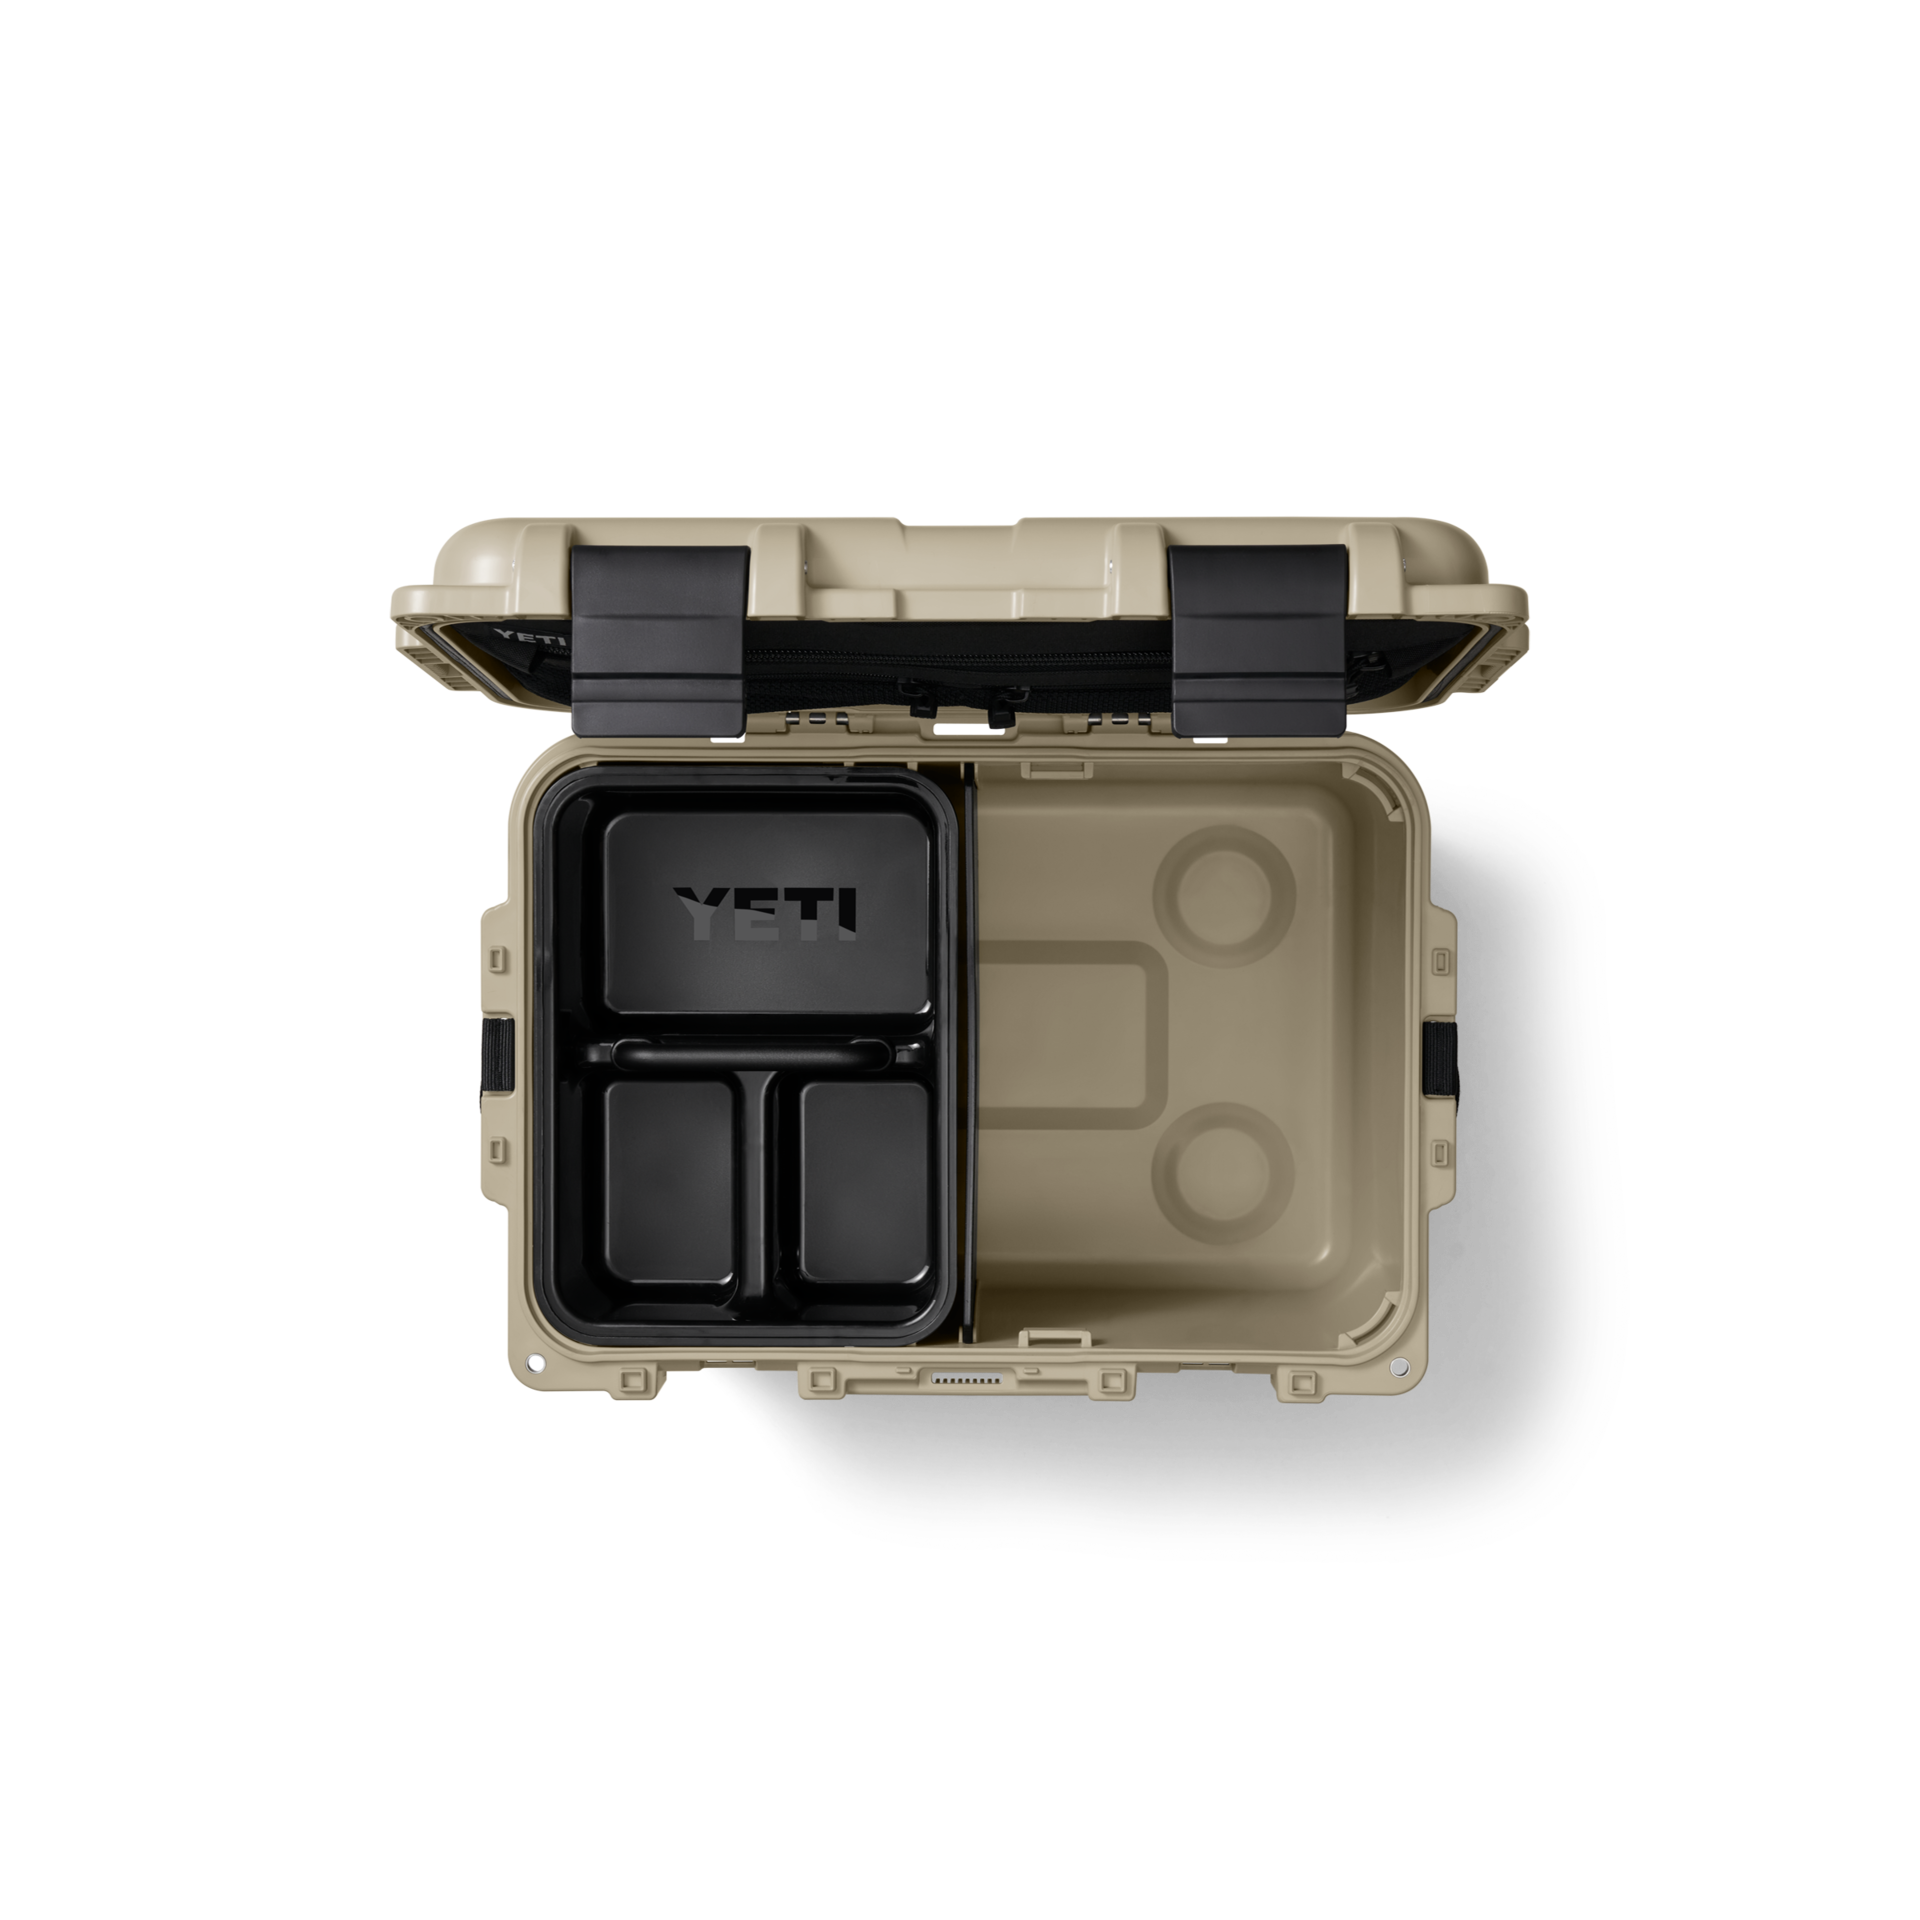 Introducing the NEW Yeti Loadout - Tackle Box Victoria